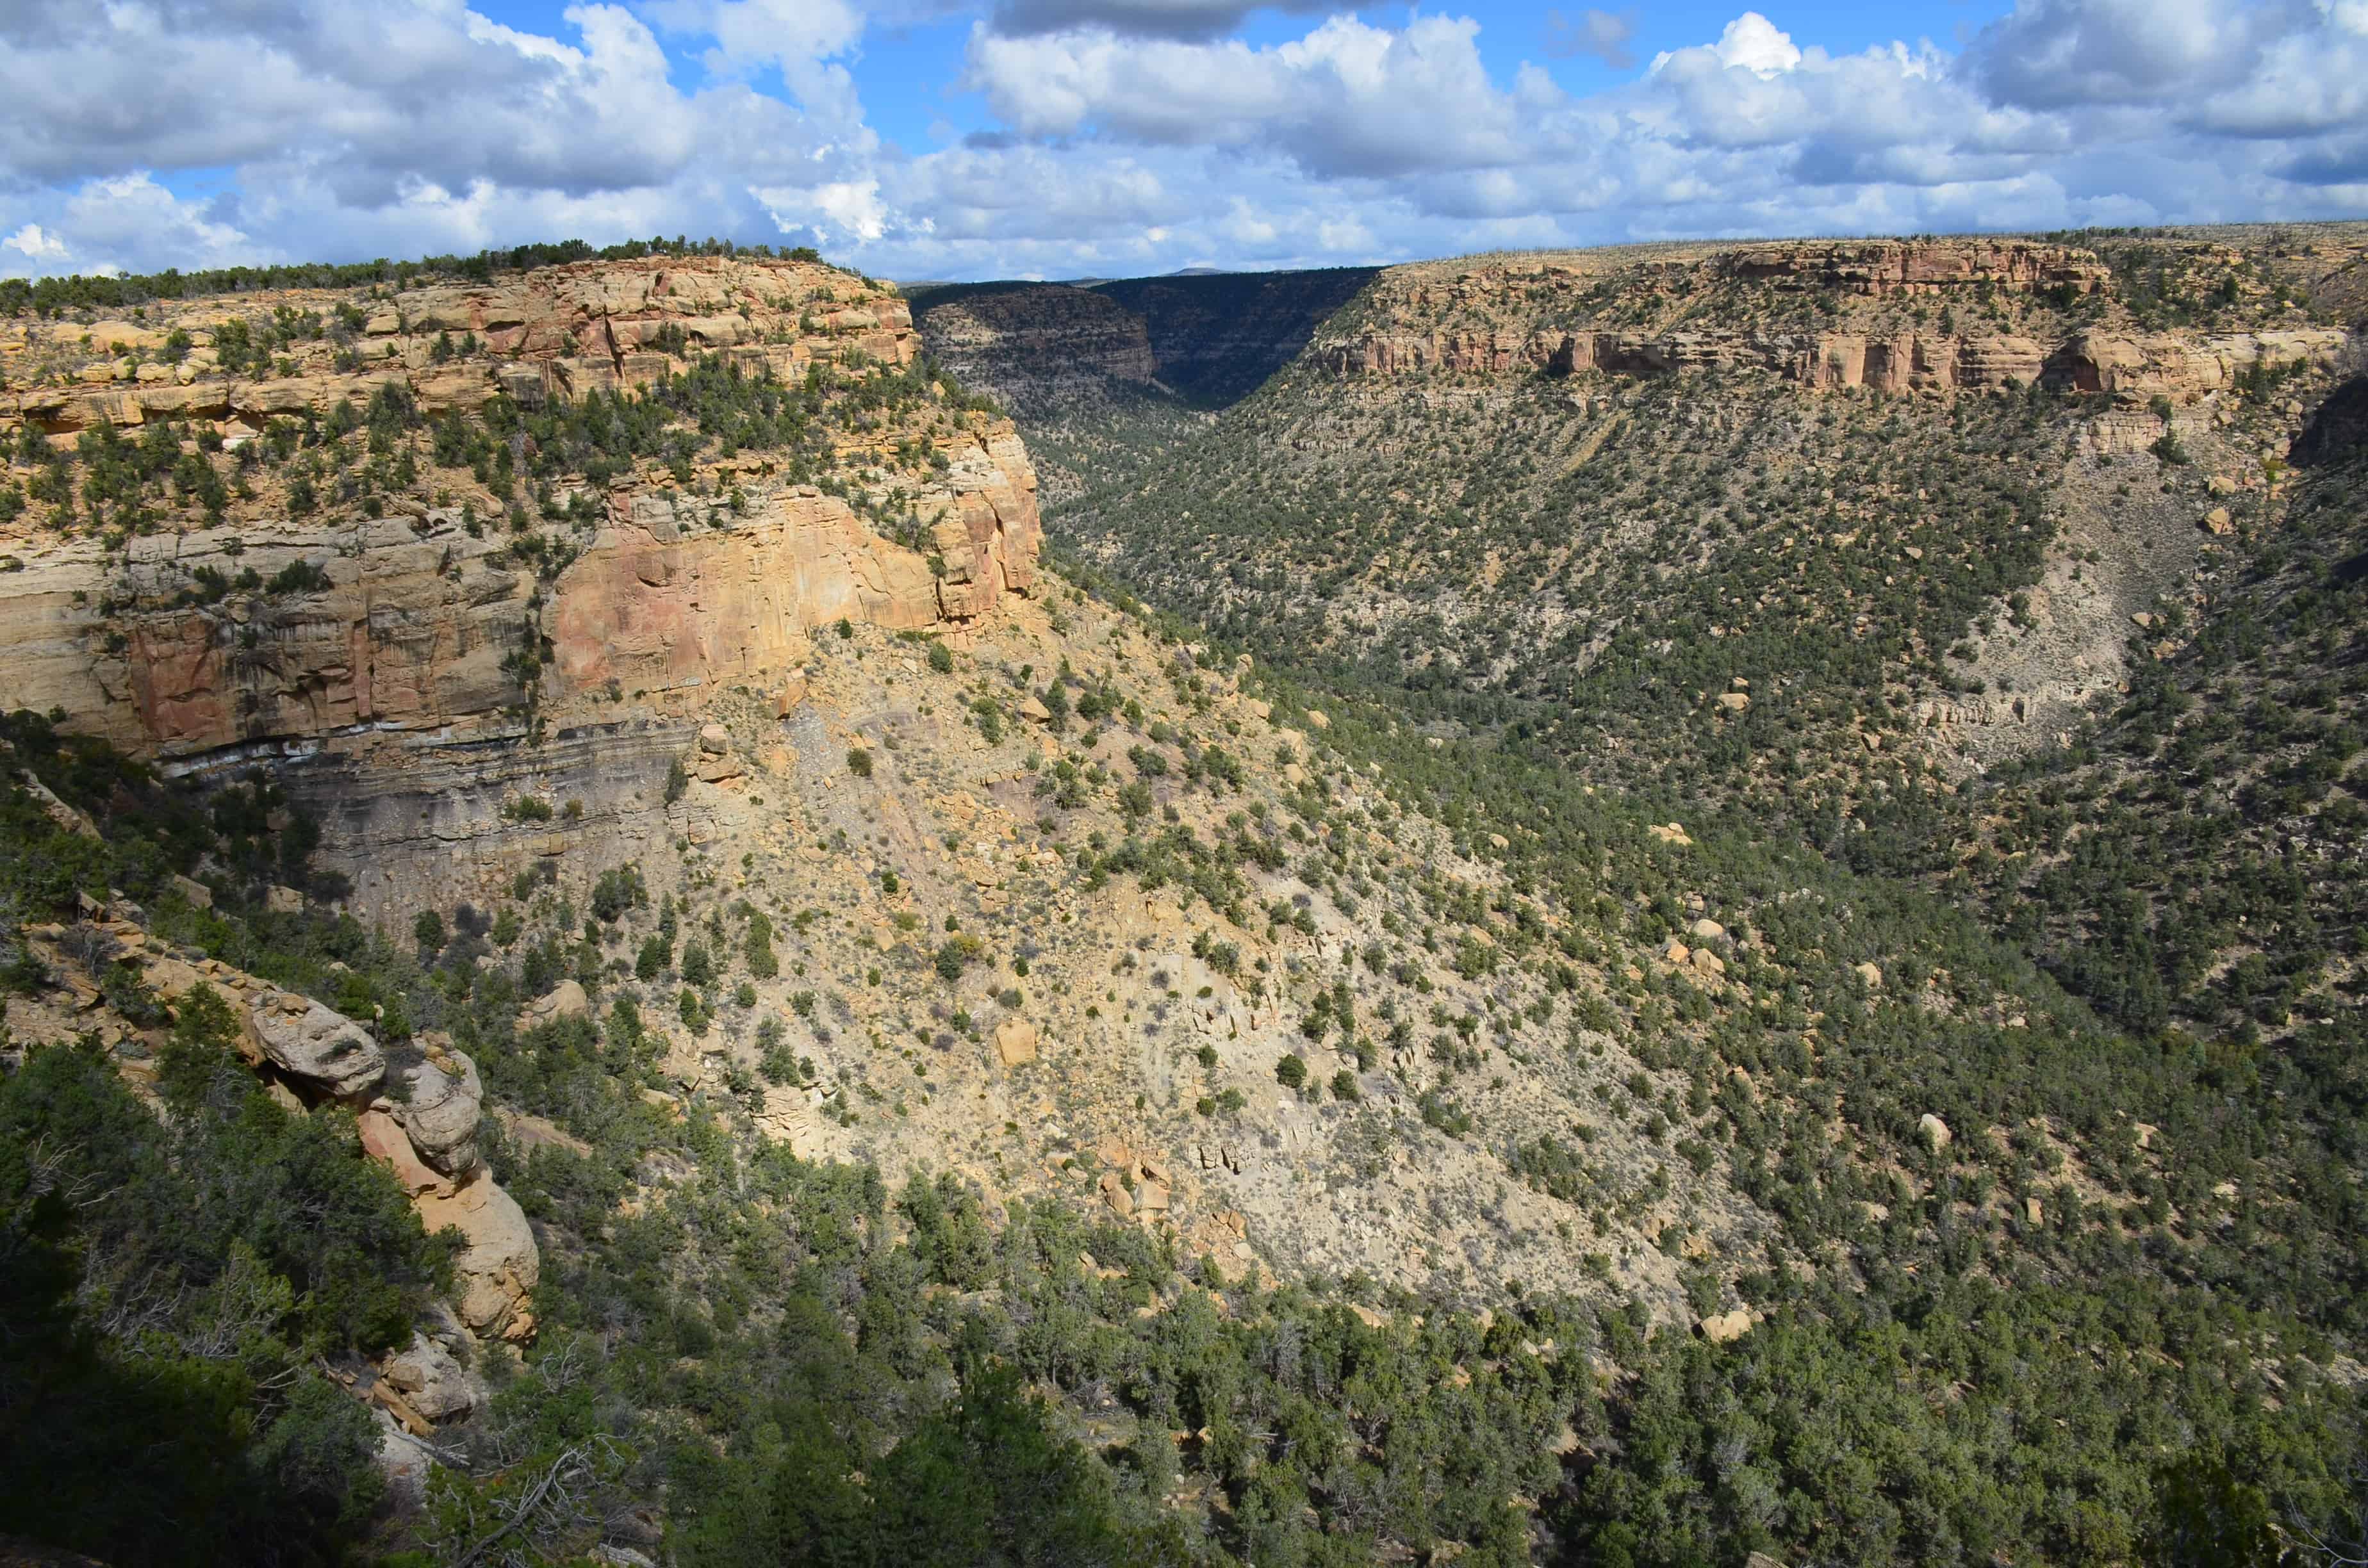 View of the canyon while climbing back up on the Balcony House tour at Mesa Verde National Park in Colorado